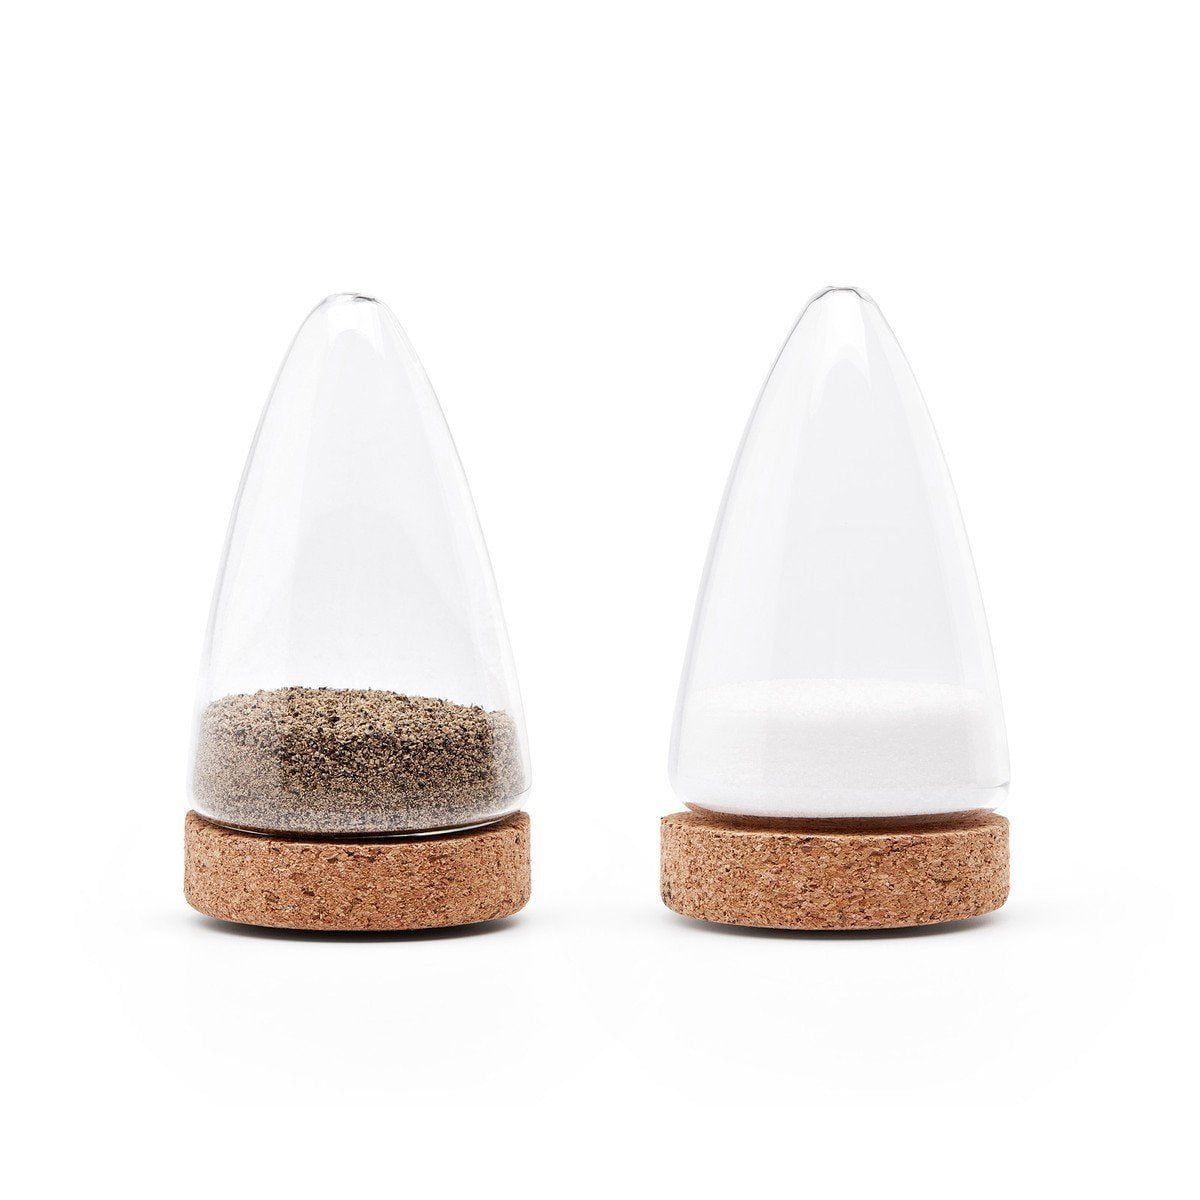 Description: Two Puik Boeien salt and pepper shakers on a white background.